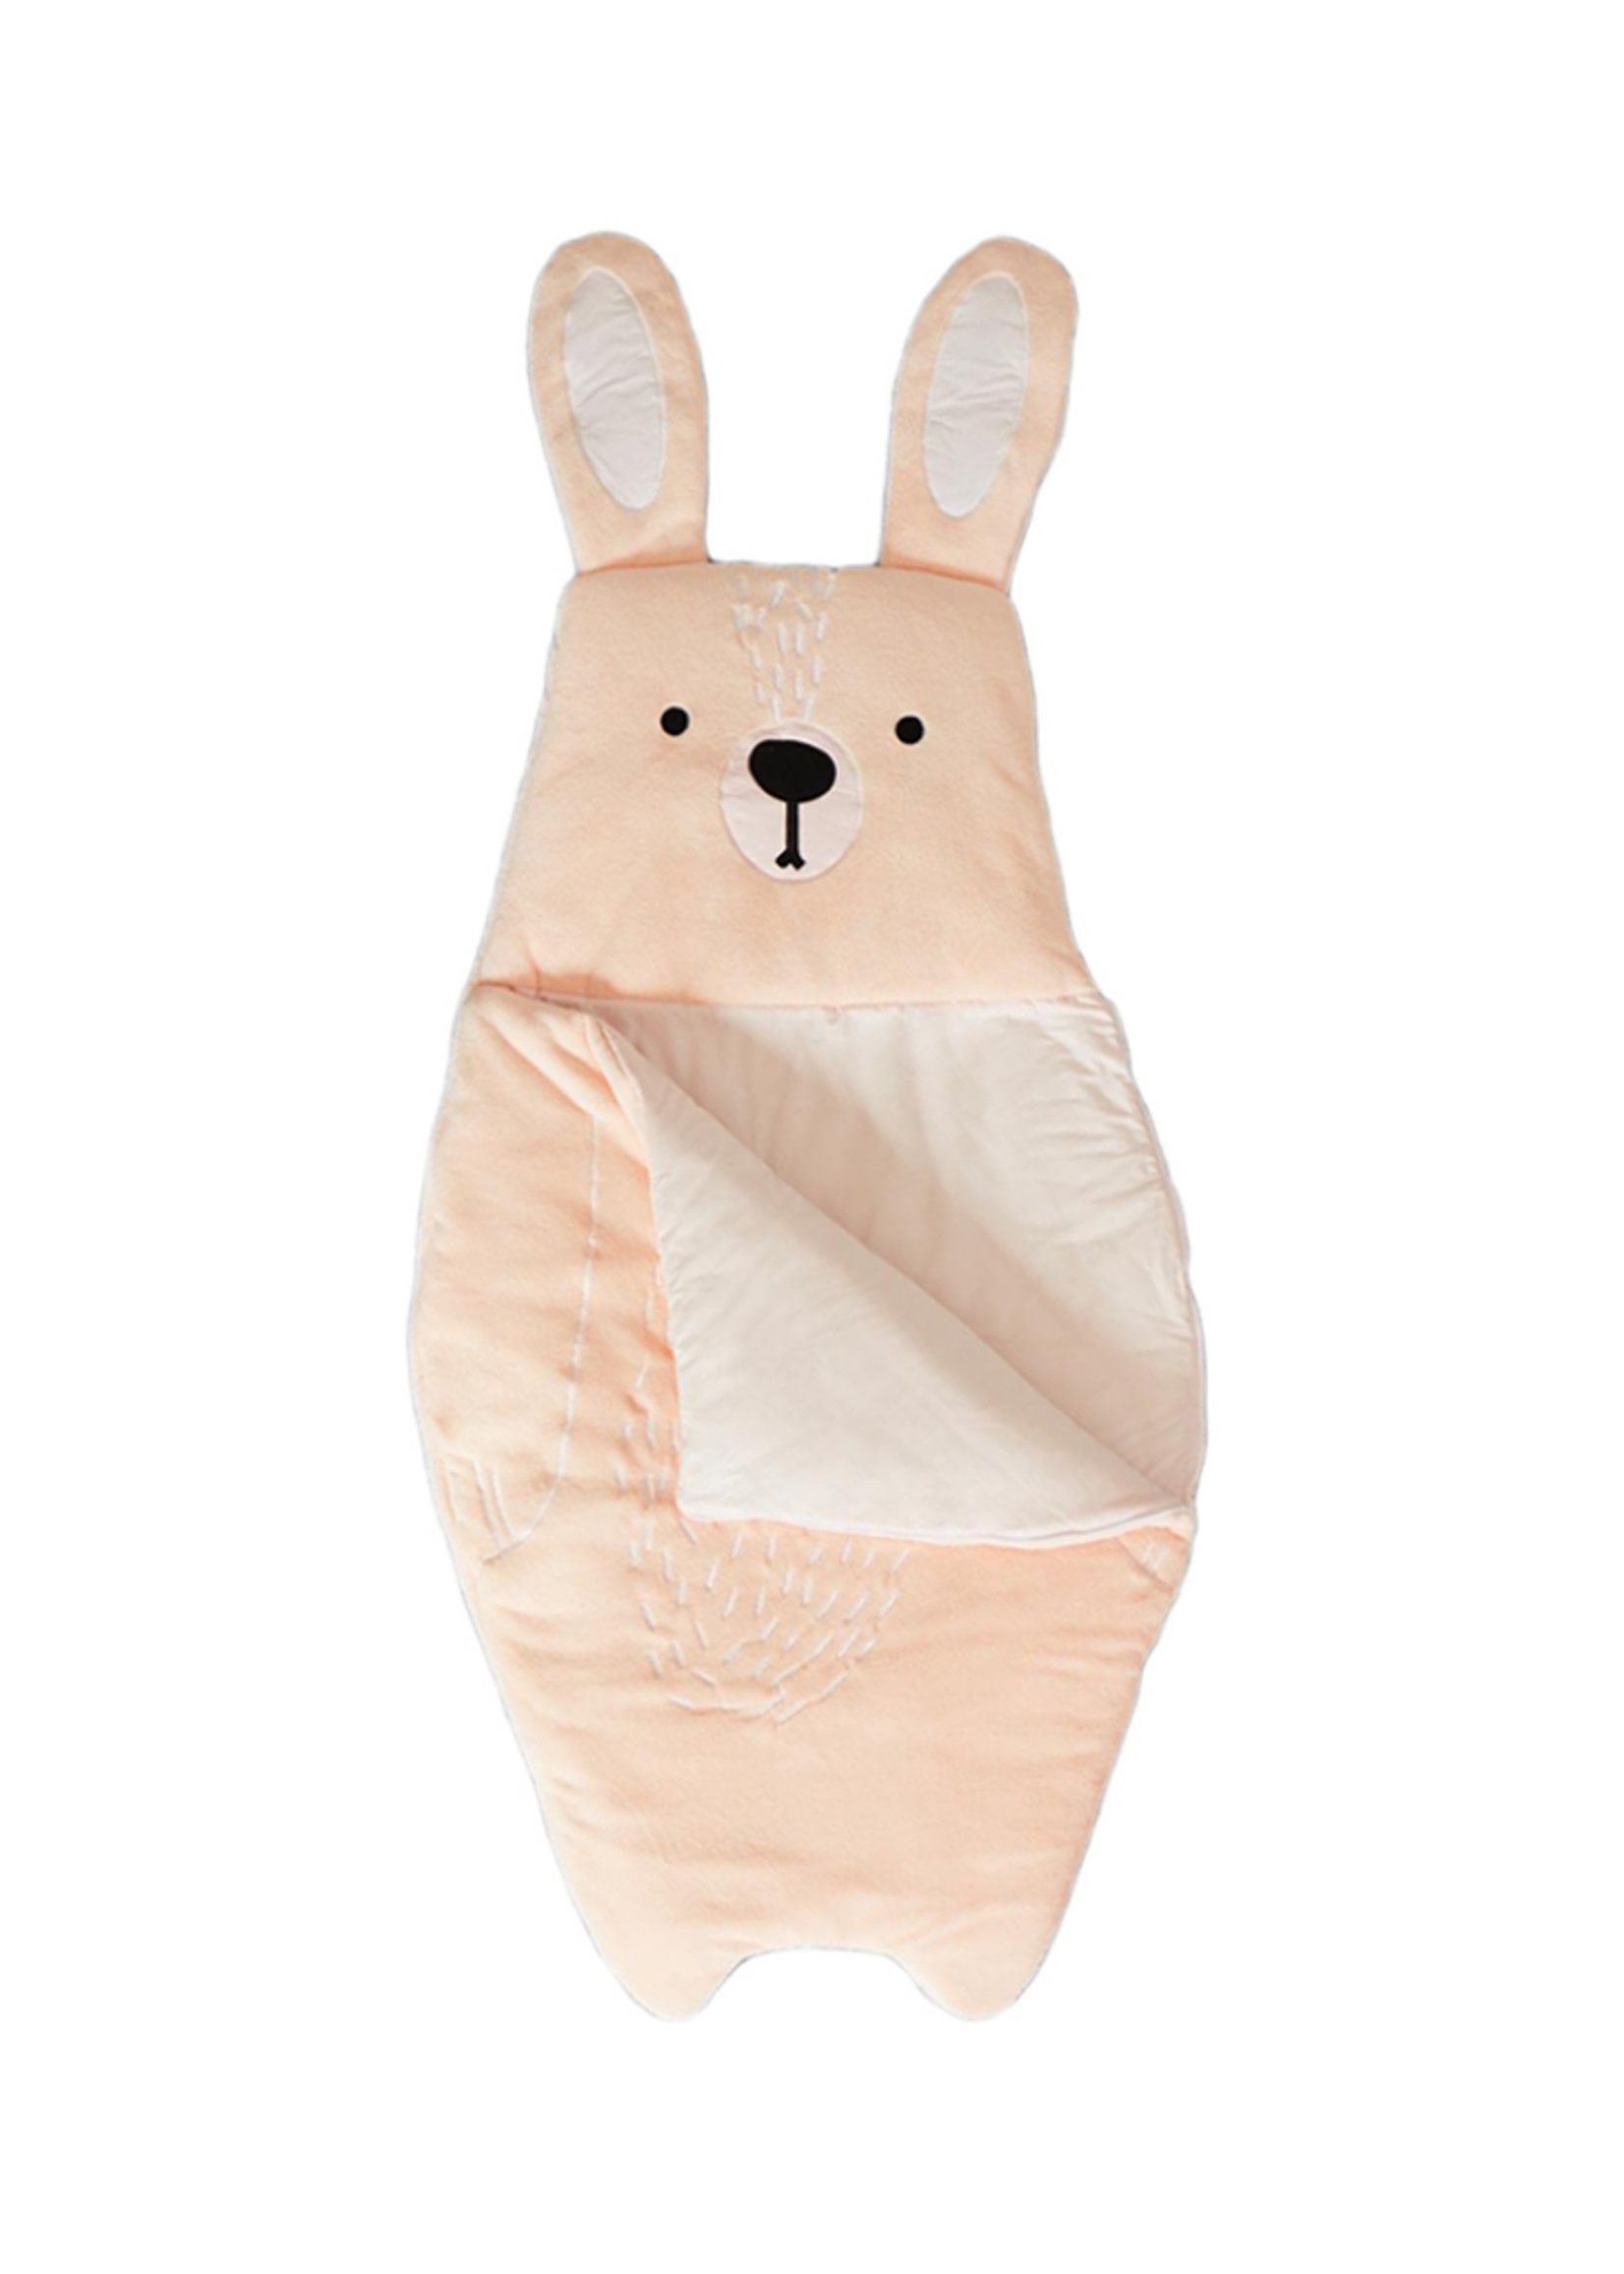 Asweets Campout Bunny Sleeping Bag